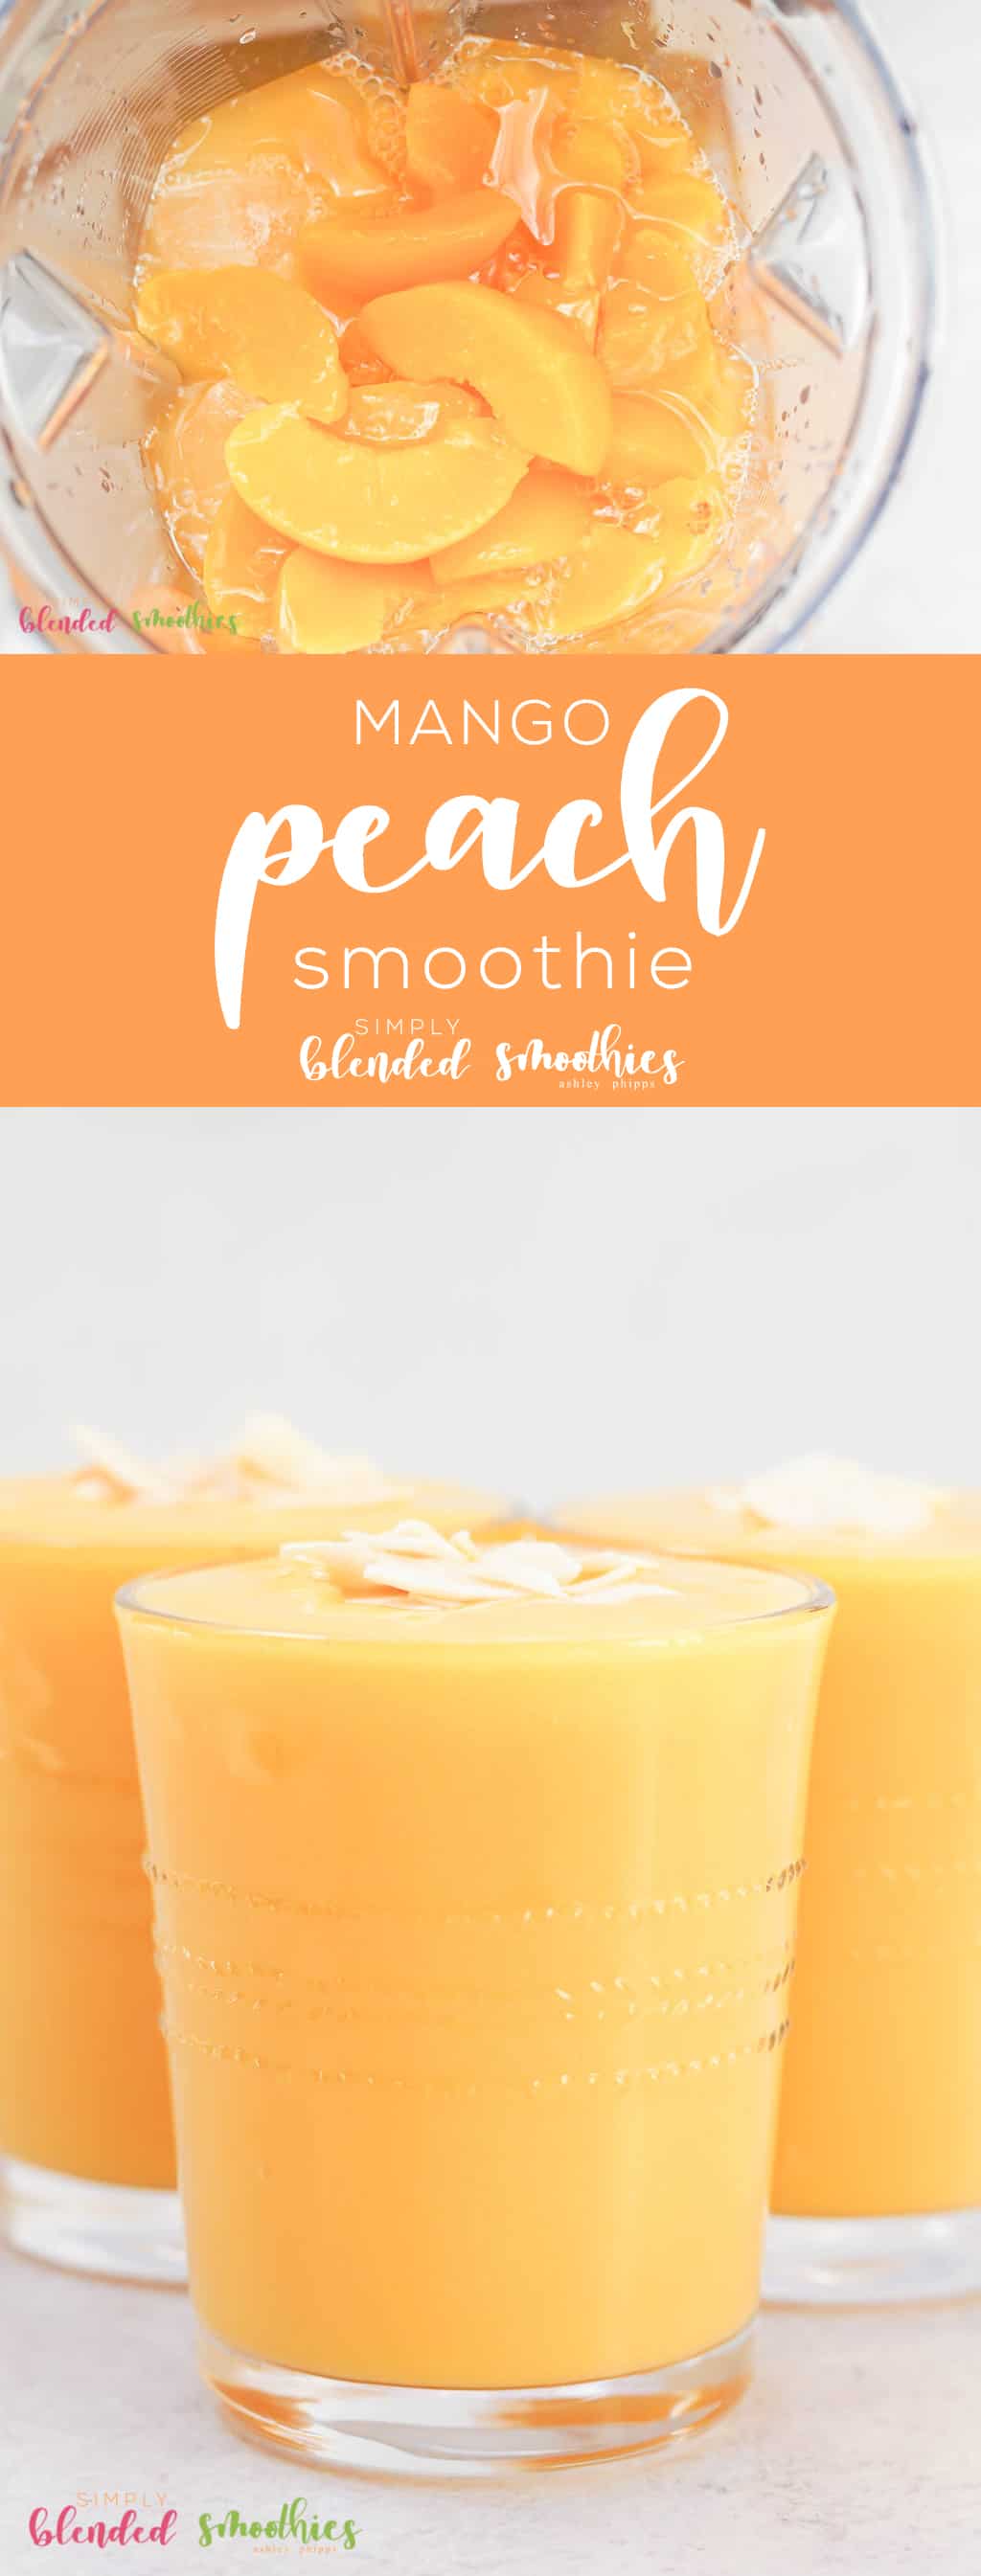 The Tropical Flavors In This Mango Peach Smoothie Are Such A Refreshing Healthy And Delicious Way To Fuel Your Day